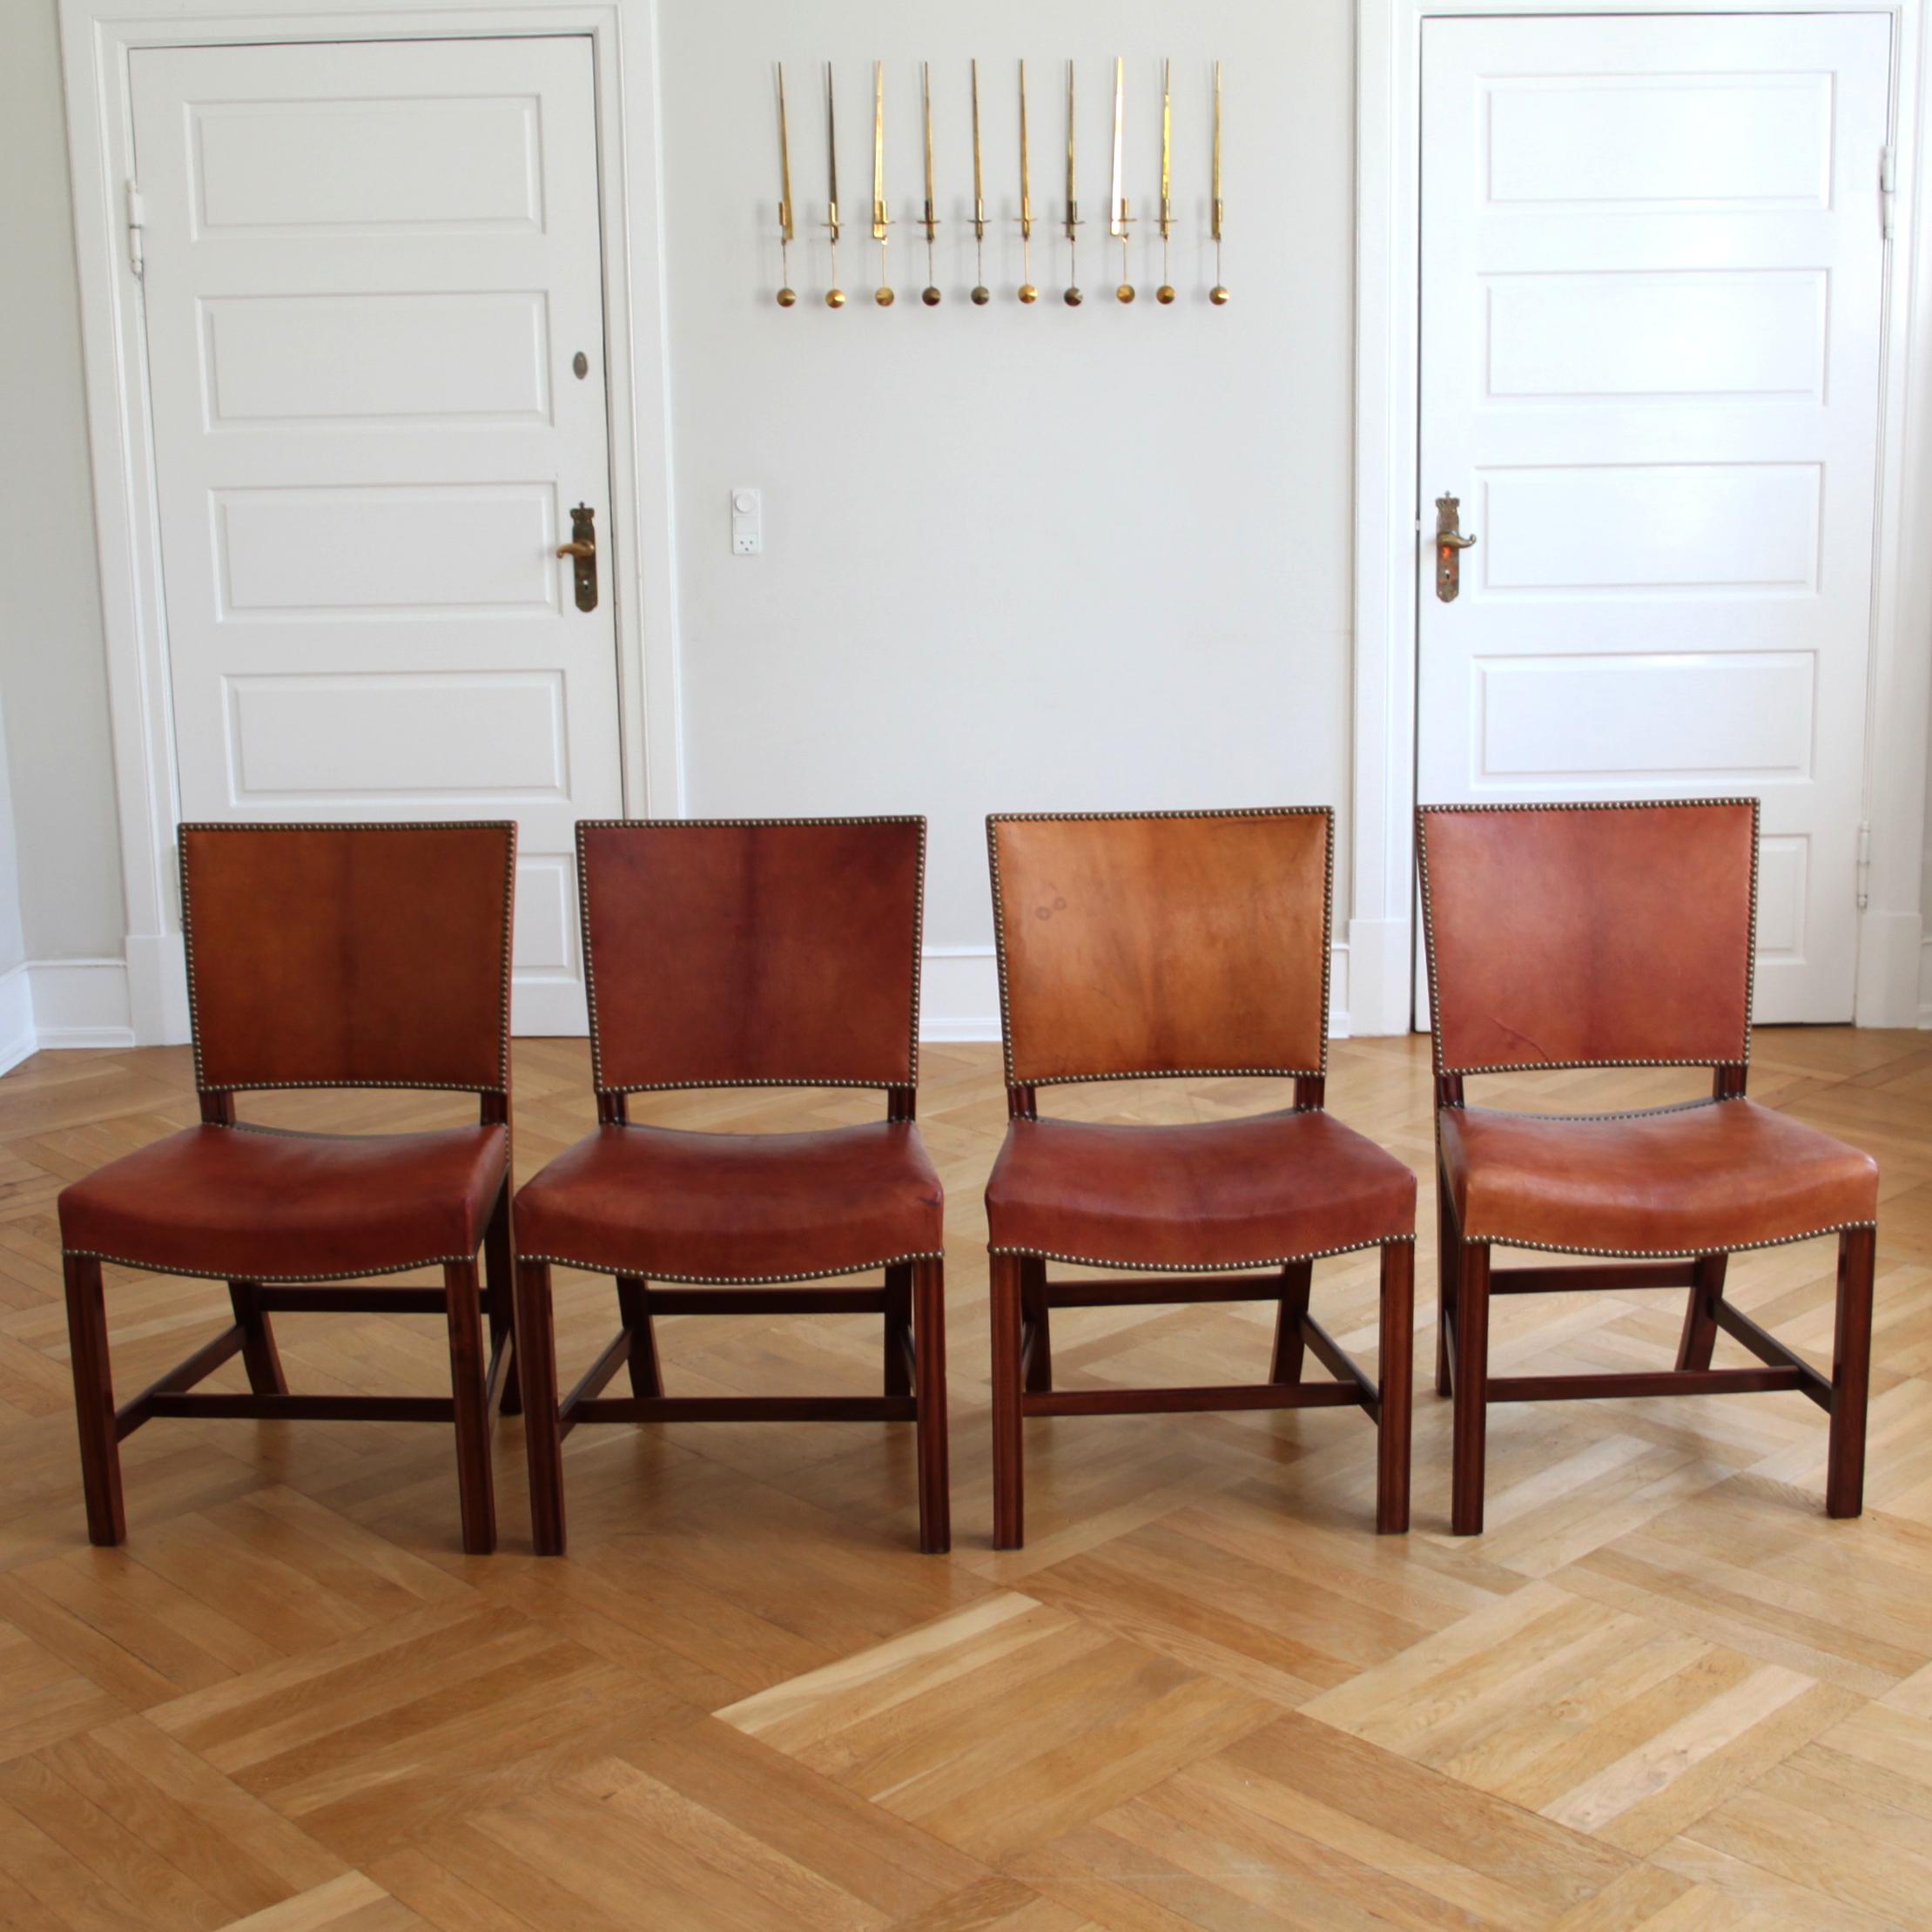 20th Century Set of 8 Kaare Klint Red Chairs, Niger Leather, Mahogany